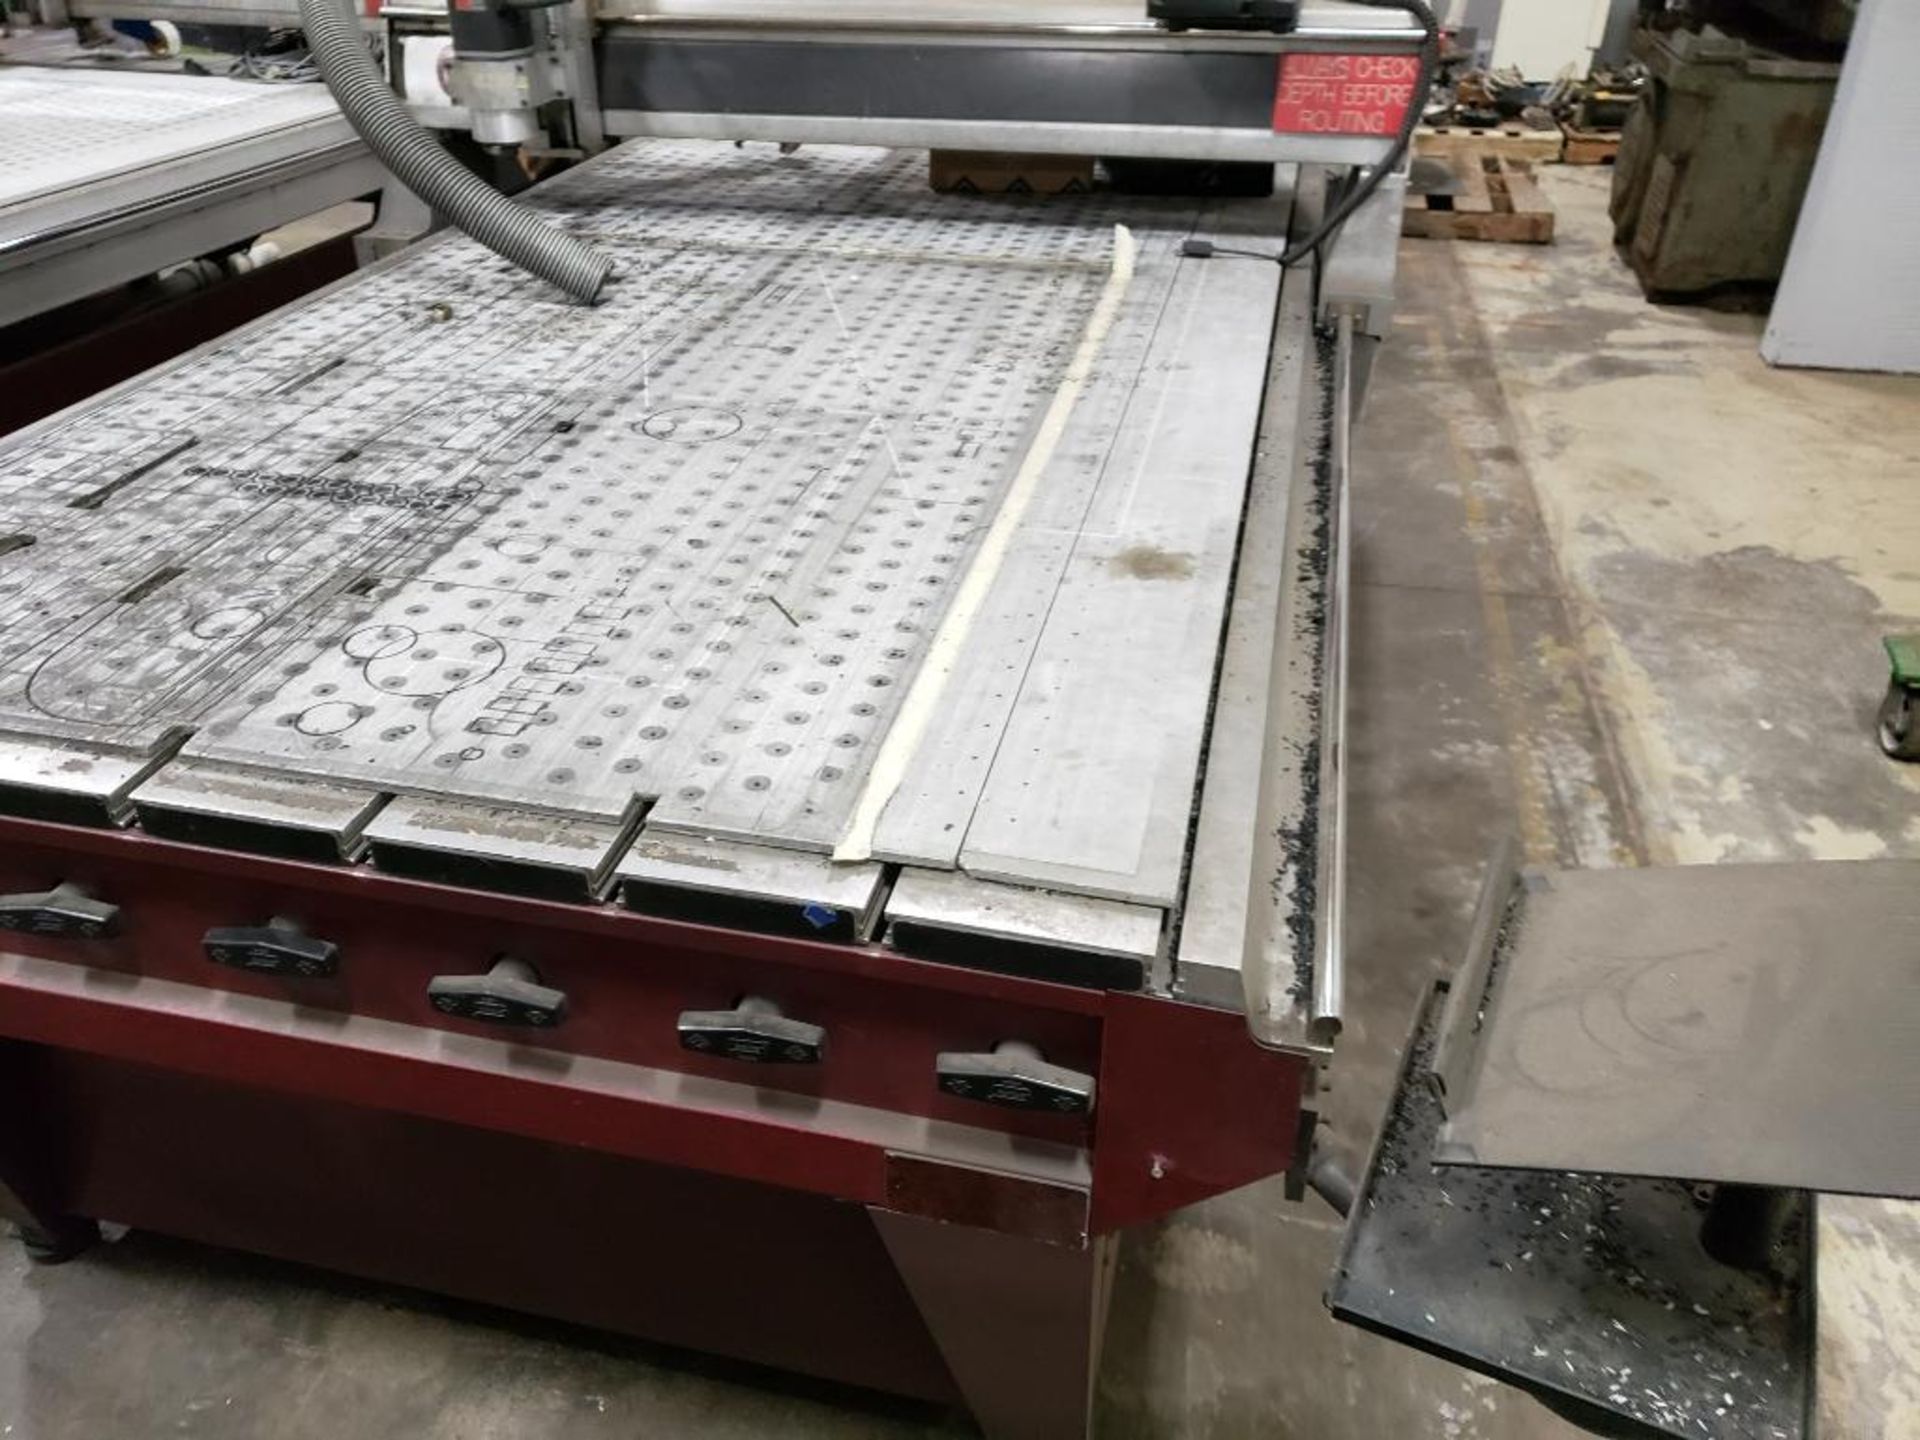 (Parts/Repairable) Gerber Sabre Model 408 CNC router. 54in x 121in table. 208-240v single phase. - Image 27 of 27